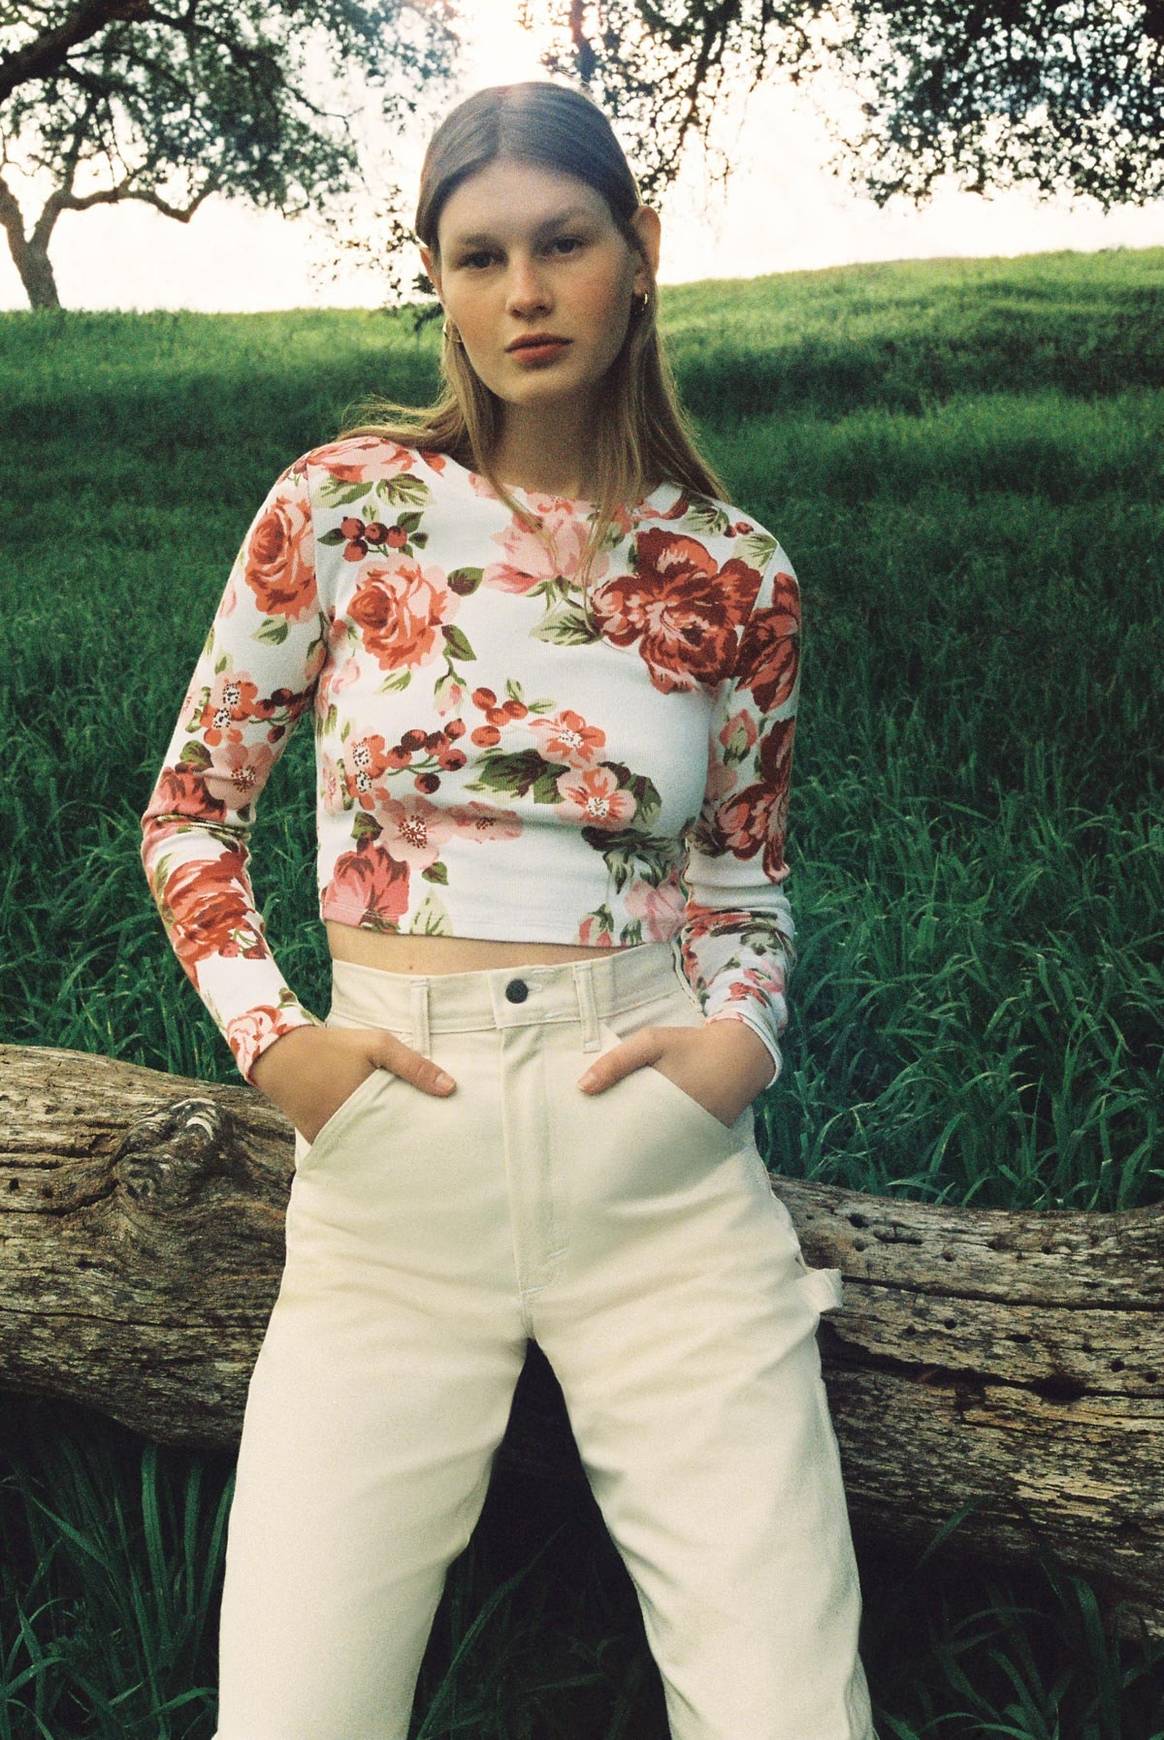 In Pictures: Urban Outfitters x Laura Ashley